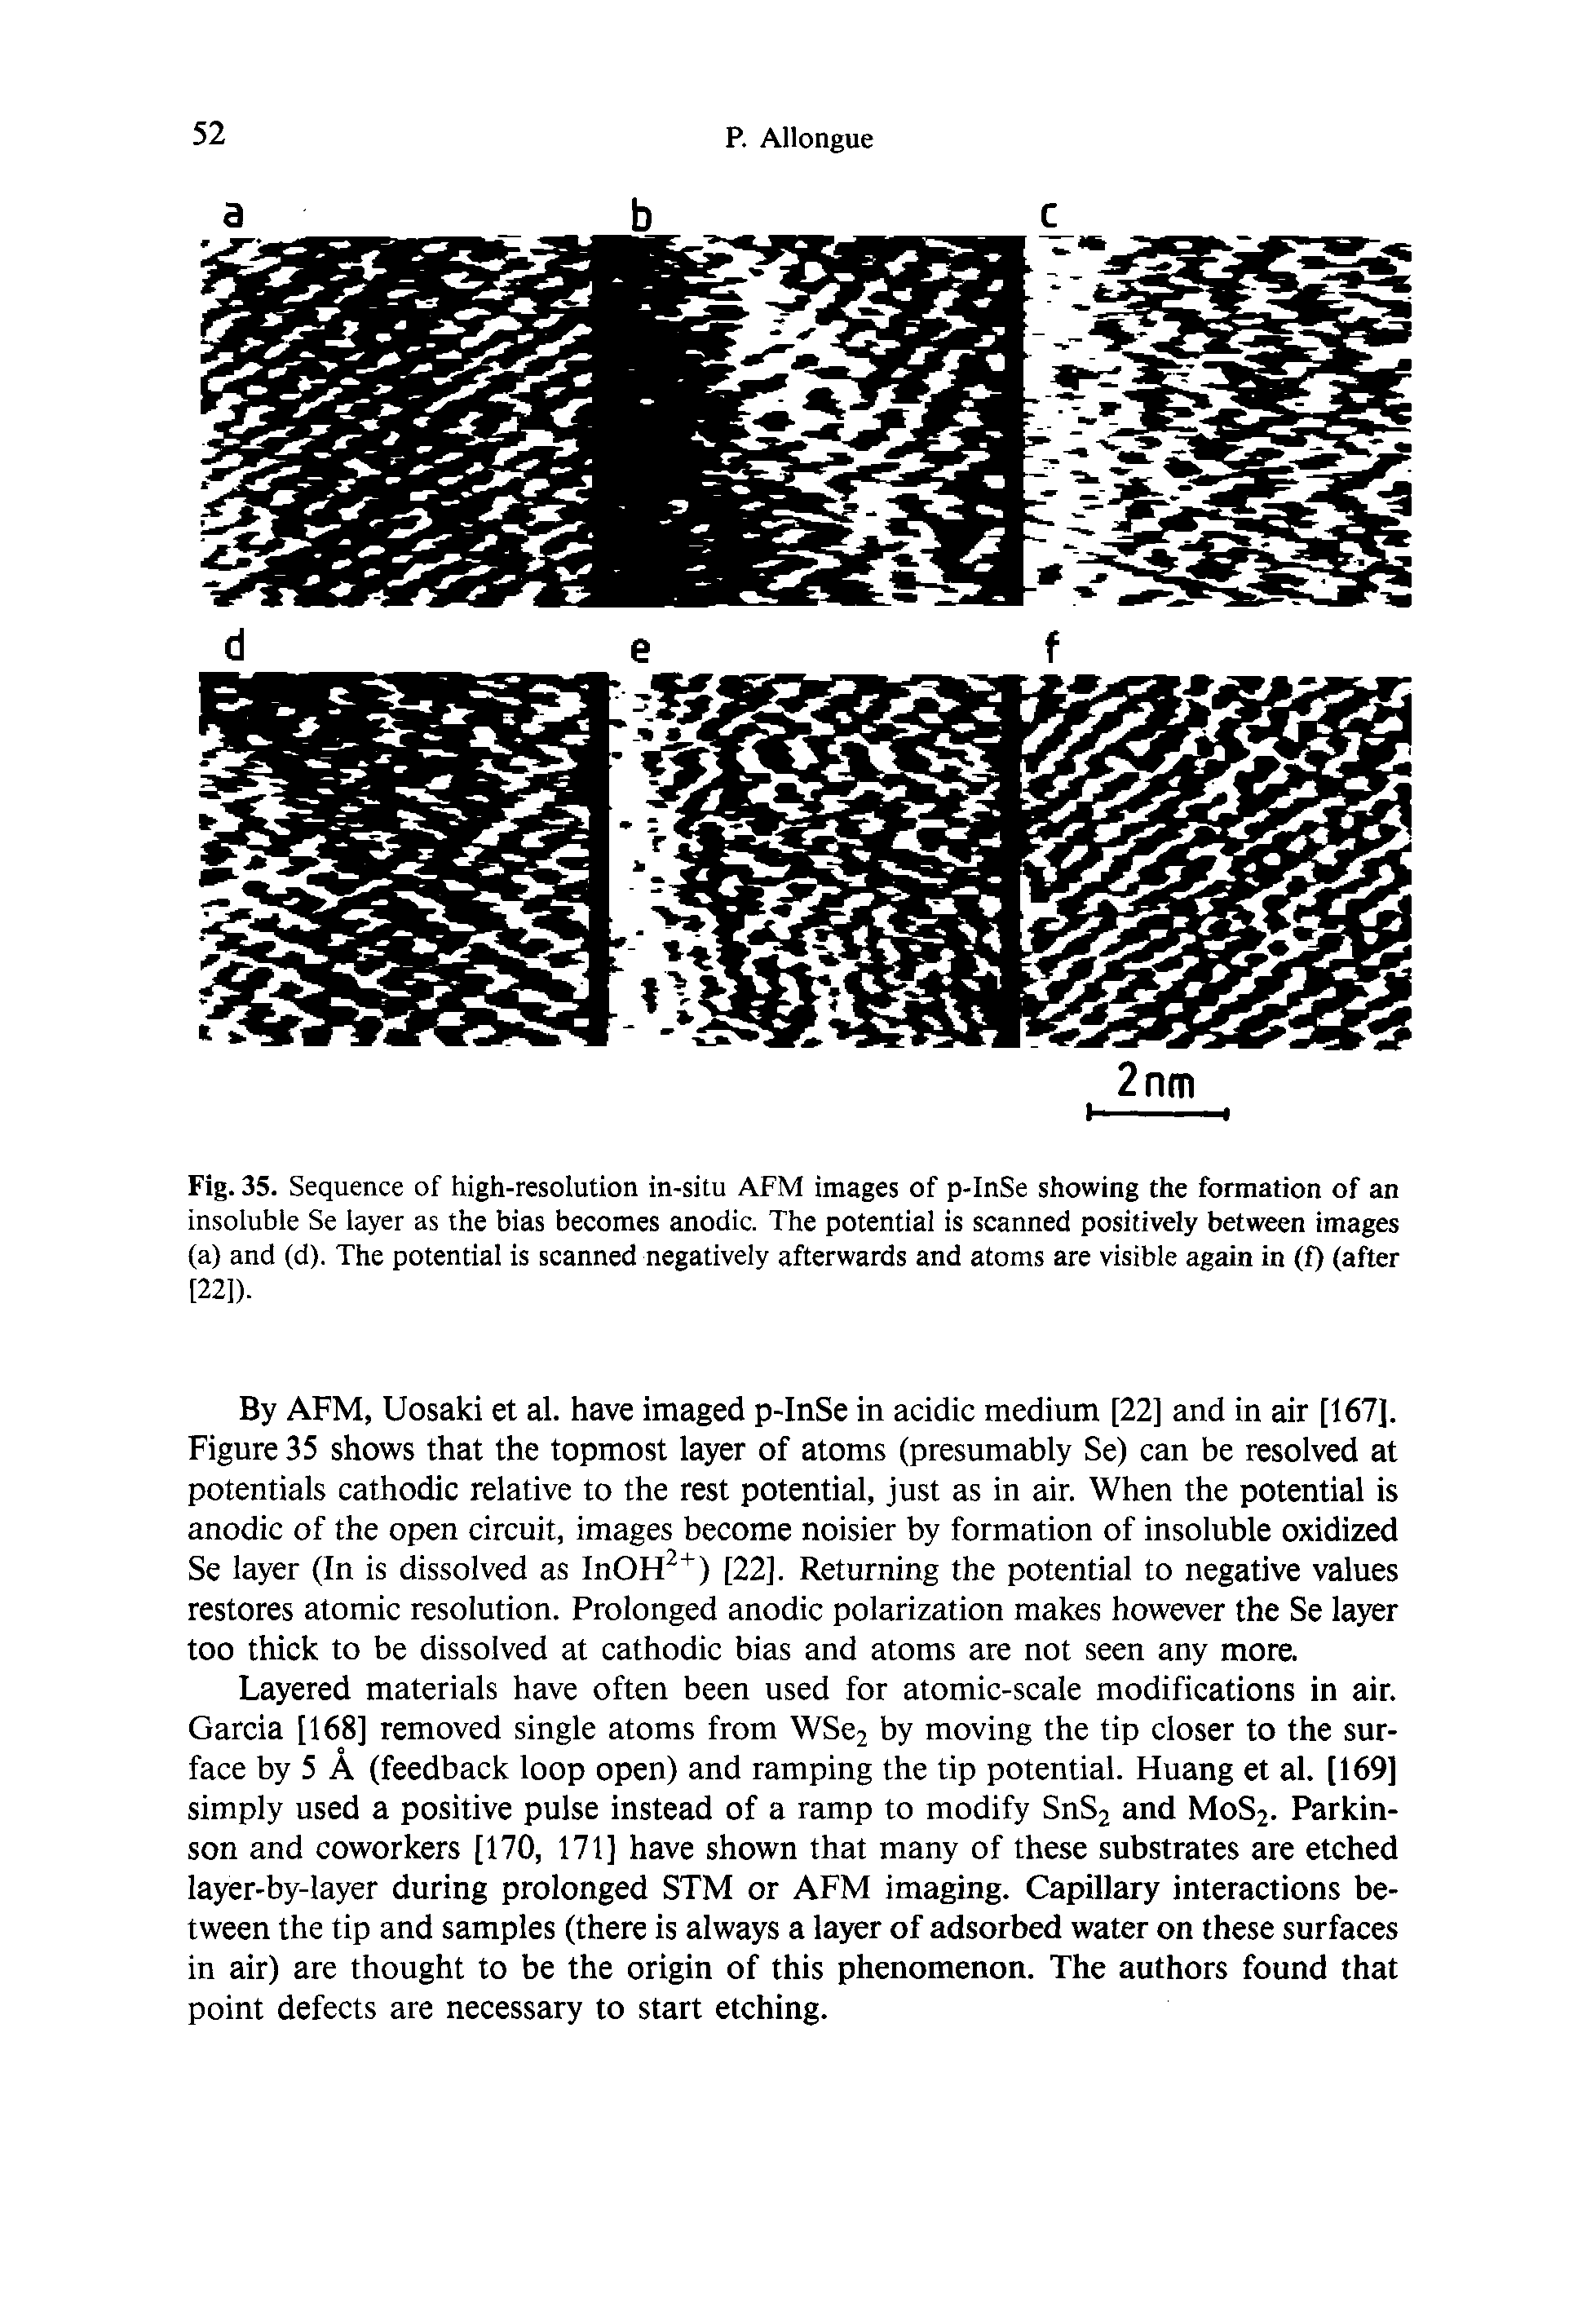 Fig. 35. Sequence of high-resolution in-situ AFM images of p-InSe showing the formation of an insoluble Se layer as the bias becomes anodic. The potential is scanned positively between images (a) and (d). The potential is scanned negatively afterwards and atoms are visible again in (f) (after [22]).